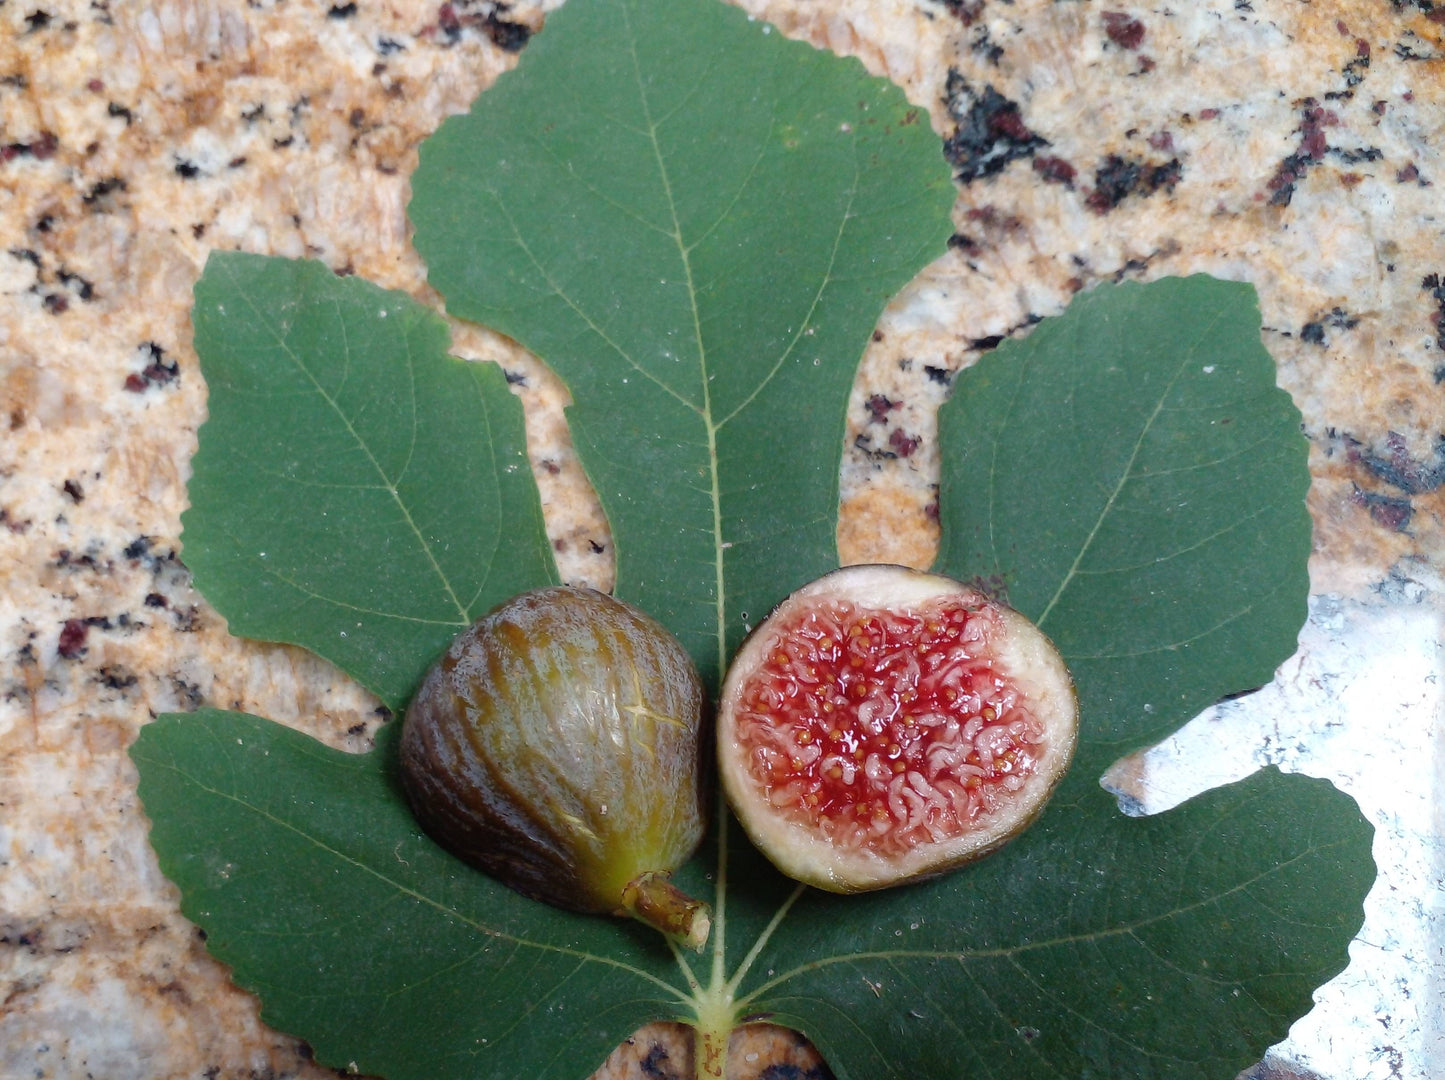 Balkans Grey Fig Tree - 50 Seeds - Easy to Grow from Seed